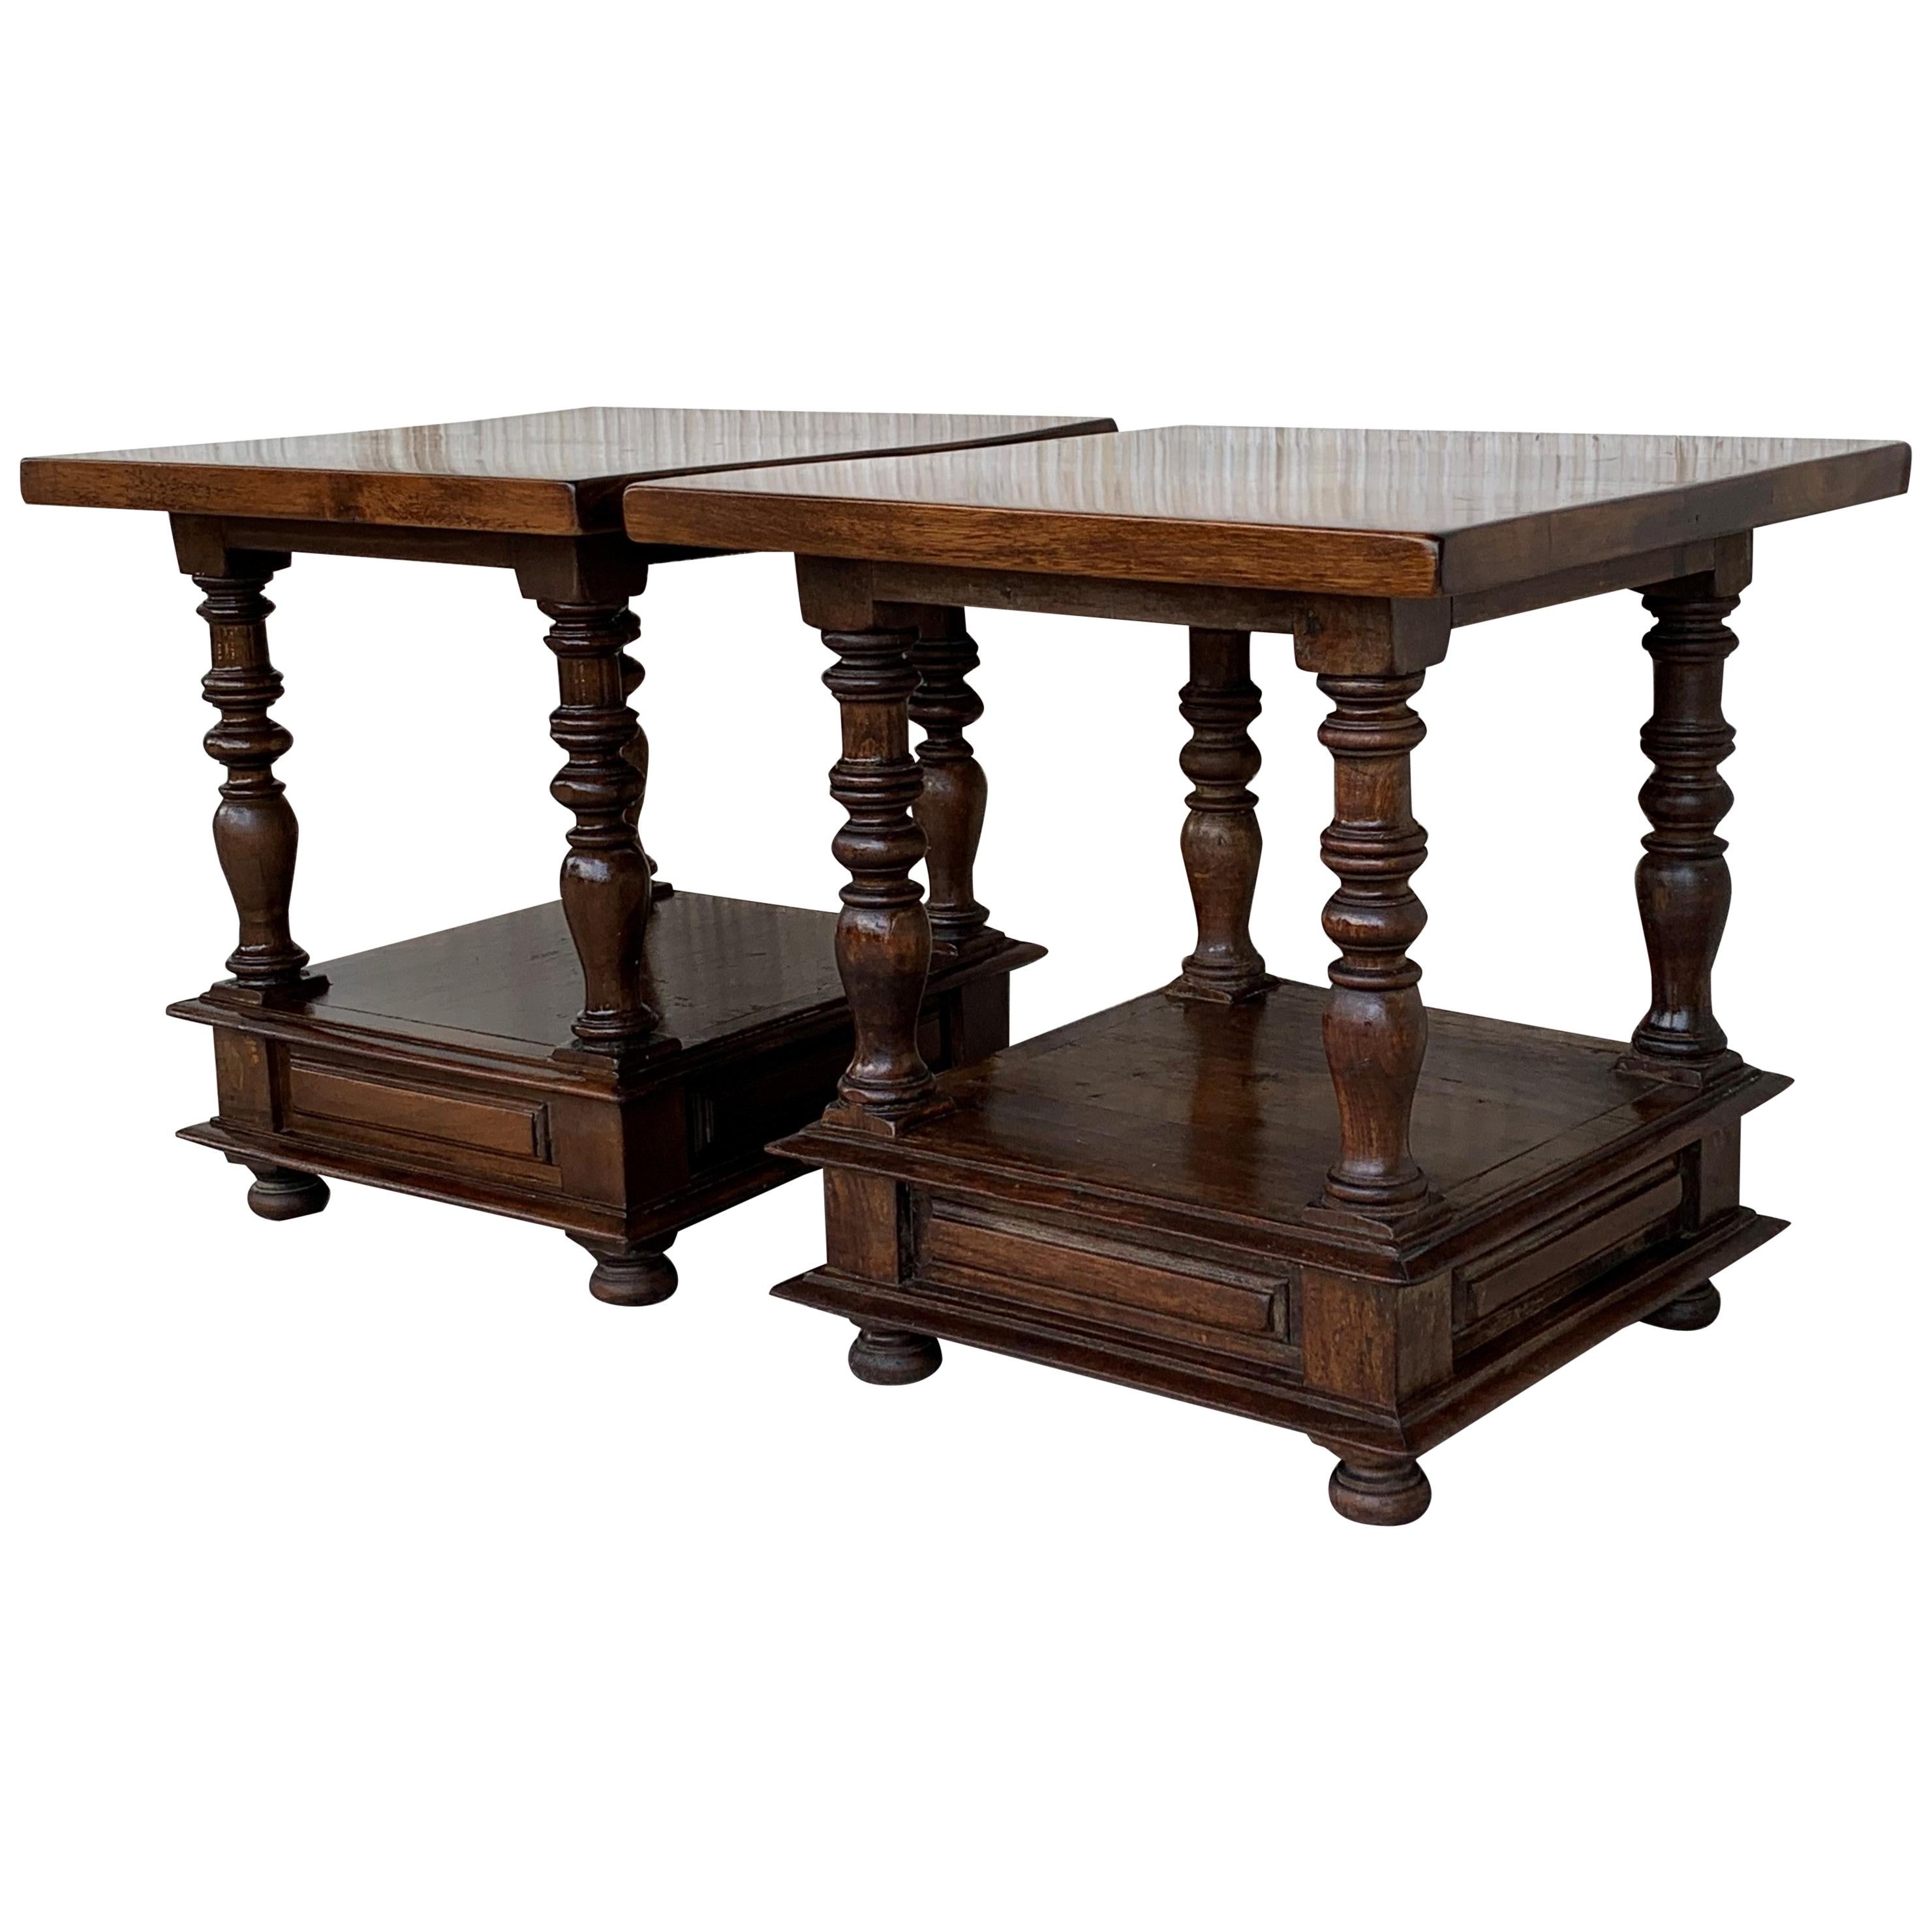 Spanish Colonial Pair of Square Solid Walnut Coffee Tables with Low Shelve